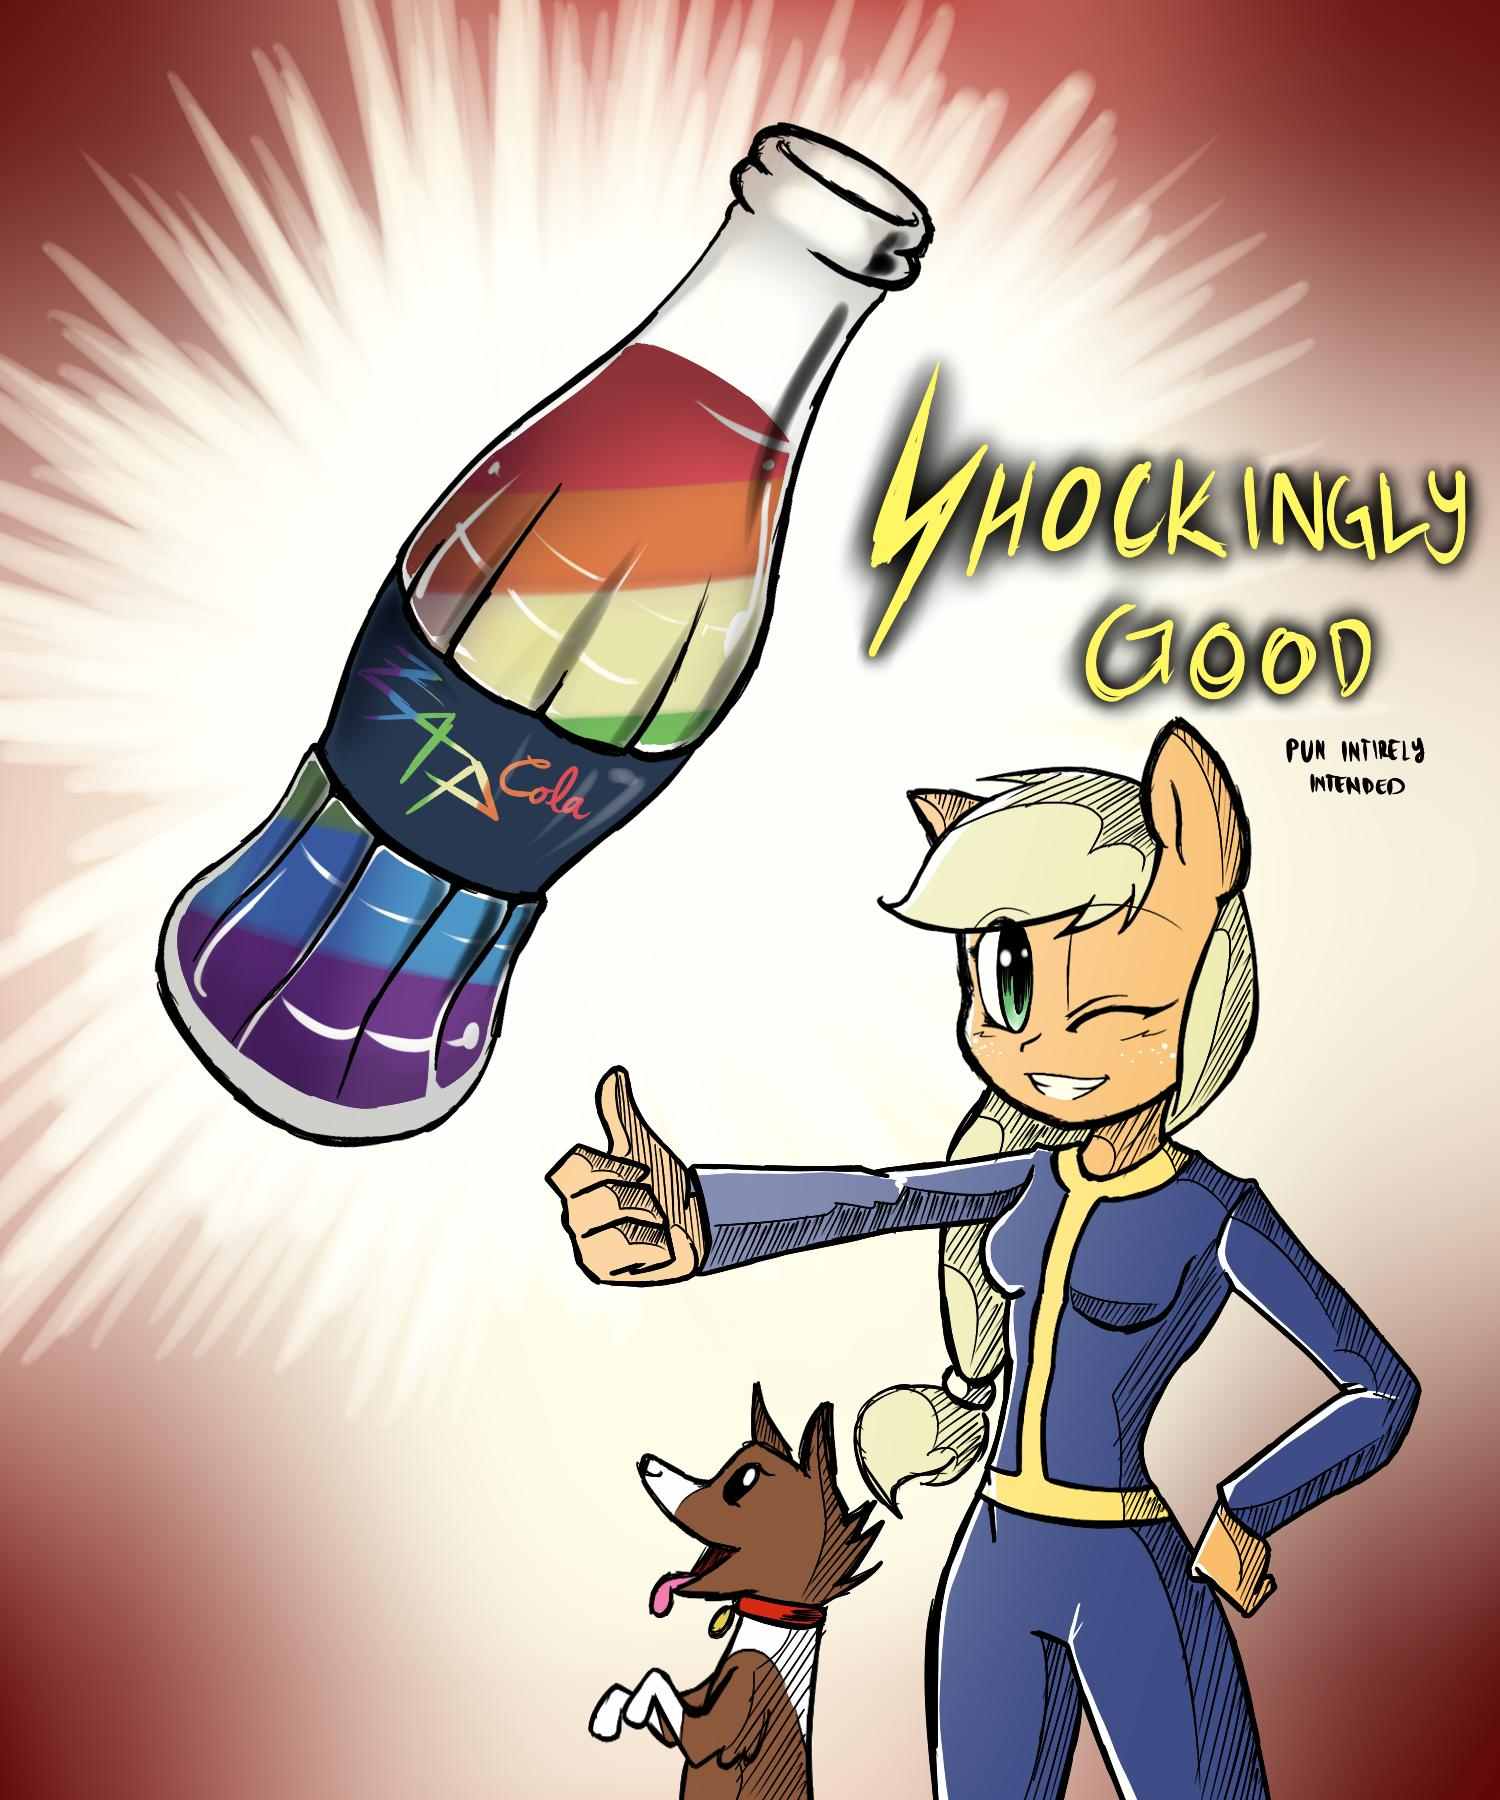 Buy Some Cola!-ponified Nuka Cola ad from Fallout3